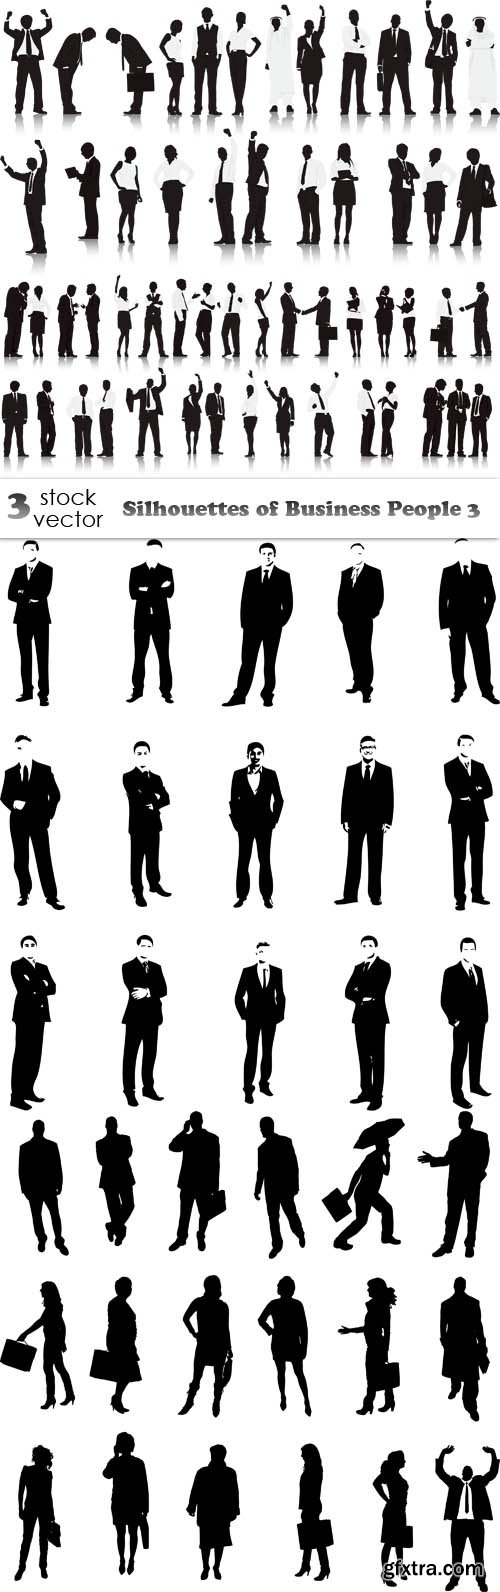 Vectors - Silhouettes of Business People 3